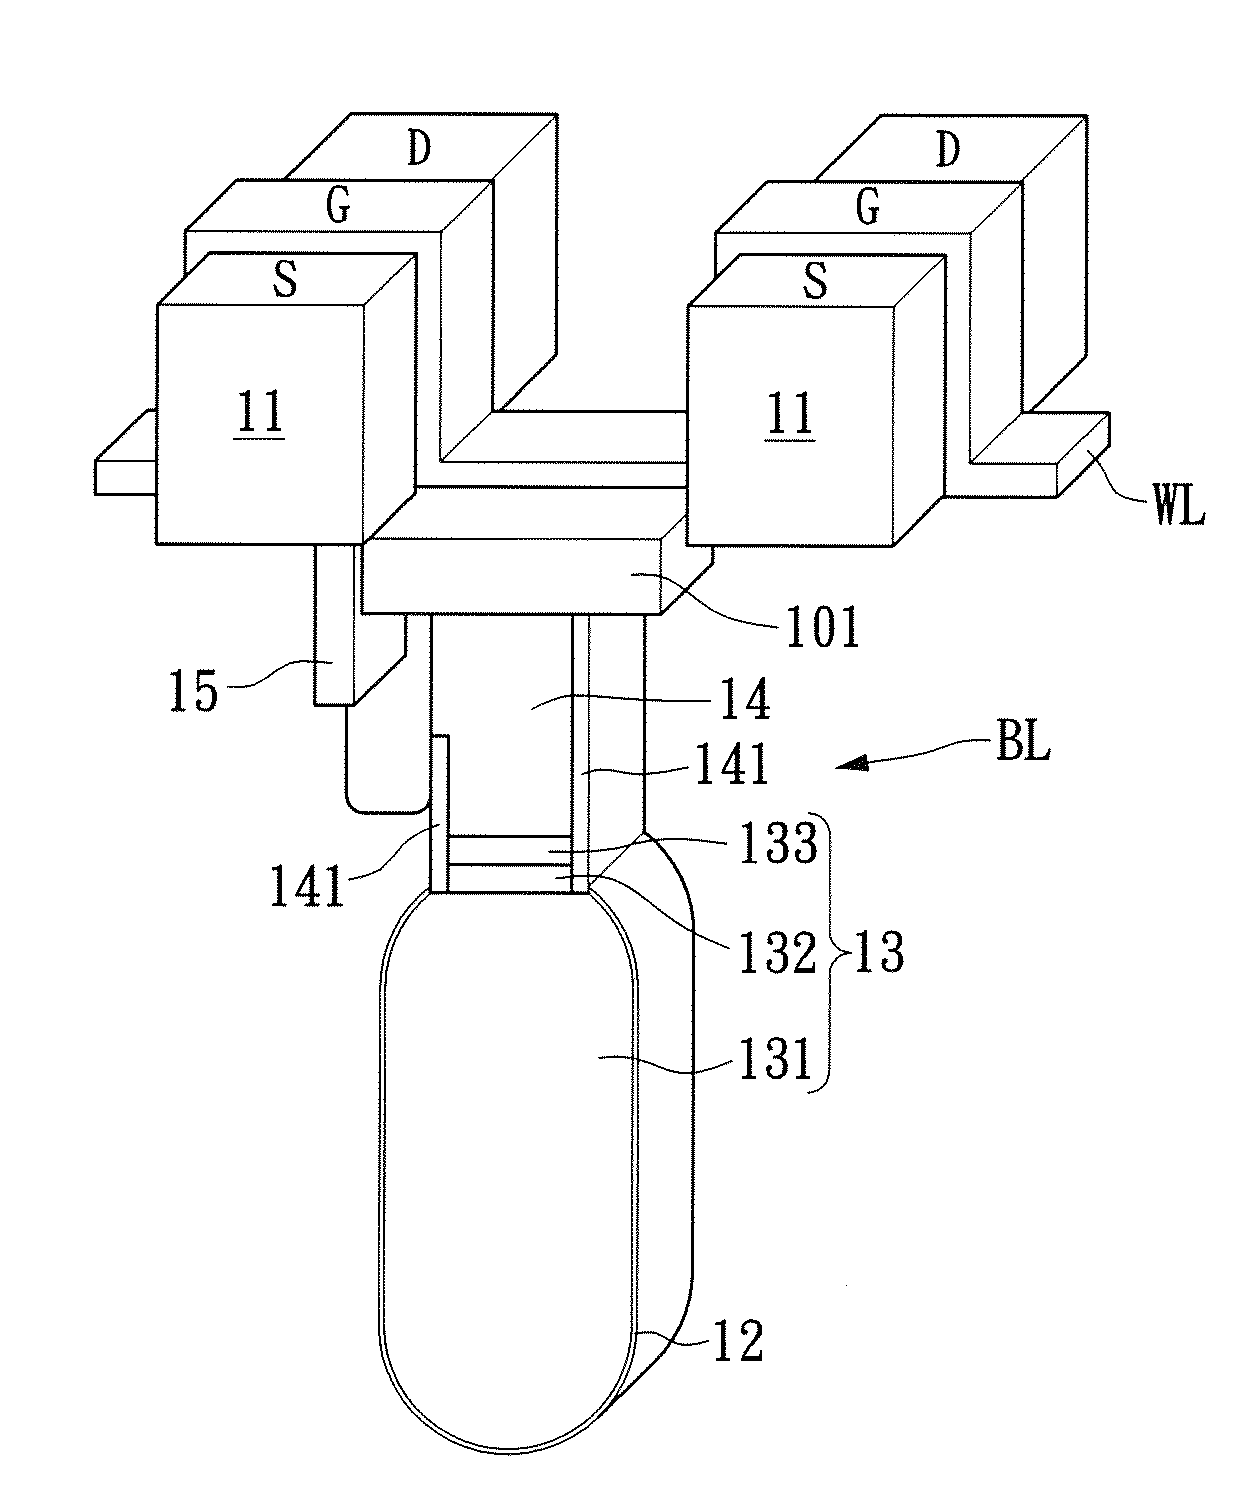 Dram cell having buried bit line and manufacturing method thereof